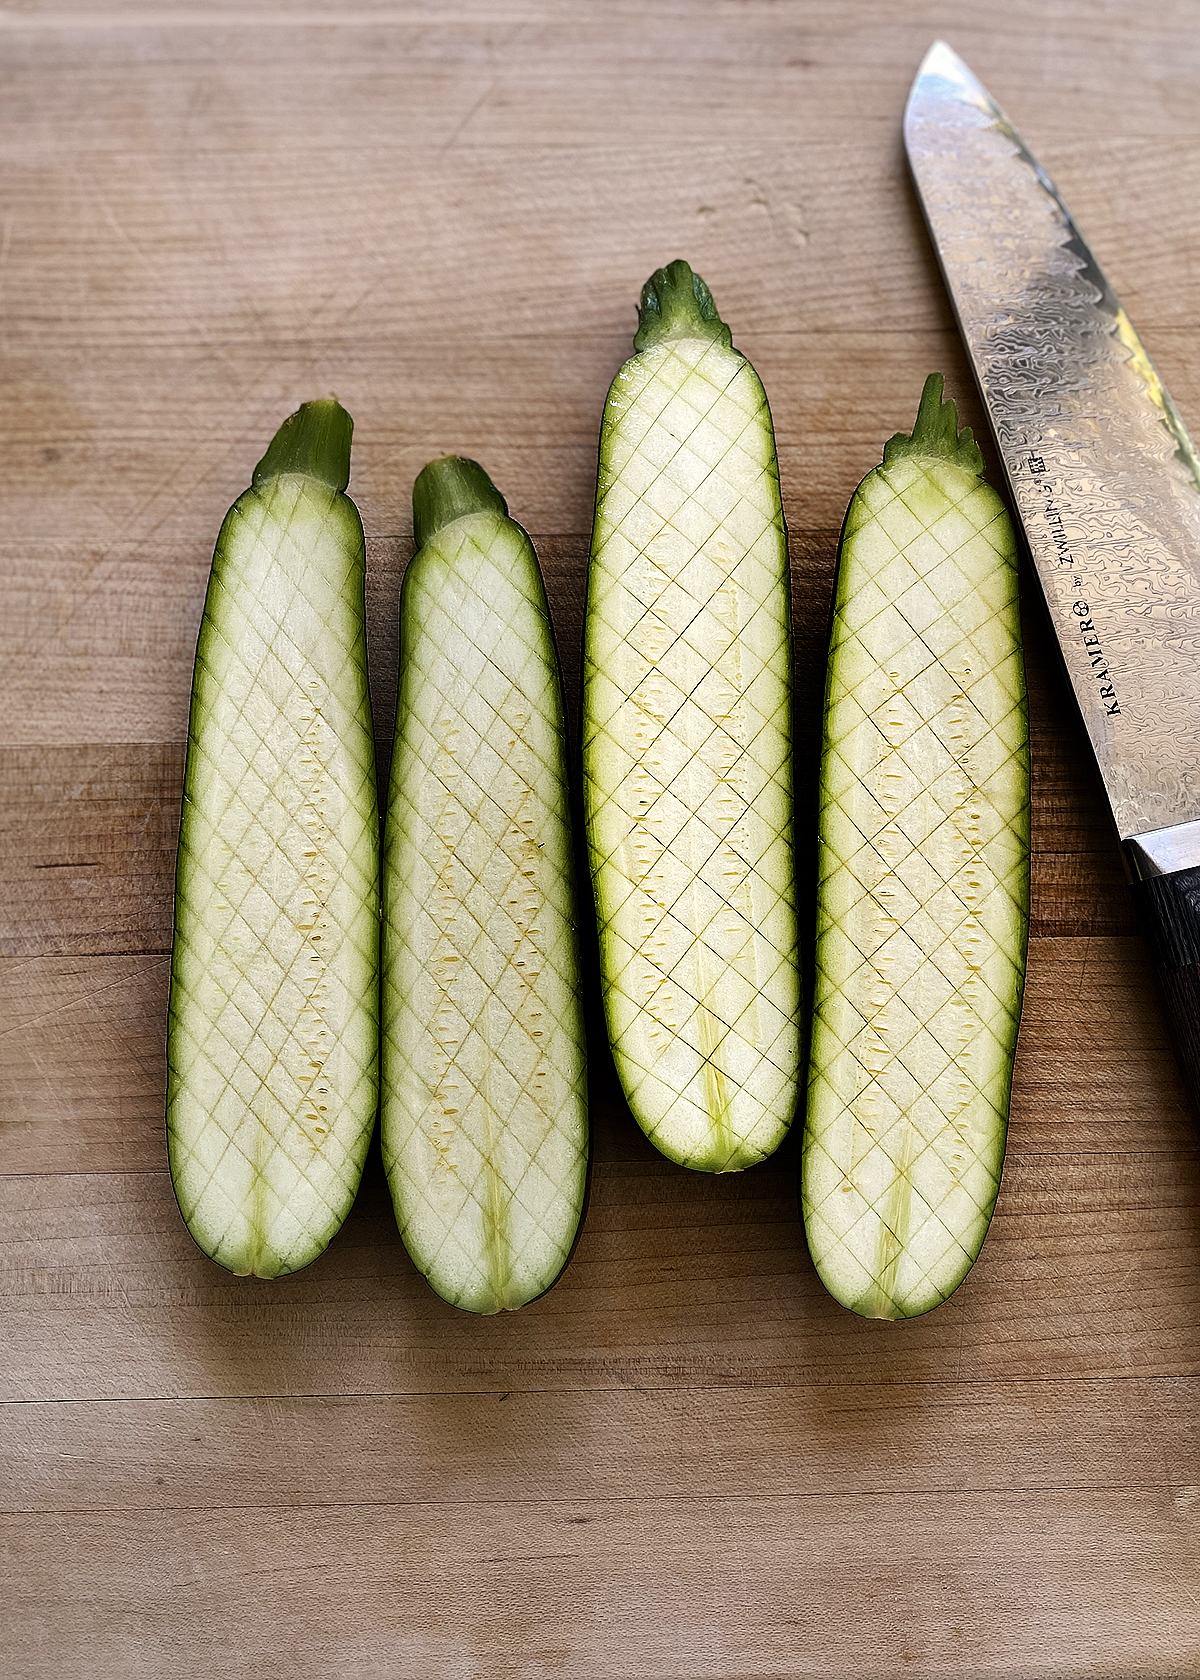 oven roasted zucchini sliced lengthwise, and cut with small cross-hatches thomas keller style, on wooden cutting board